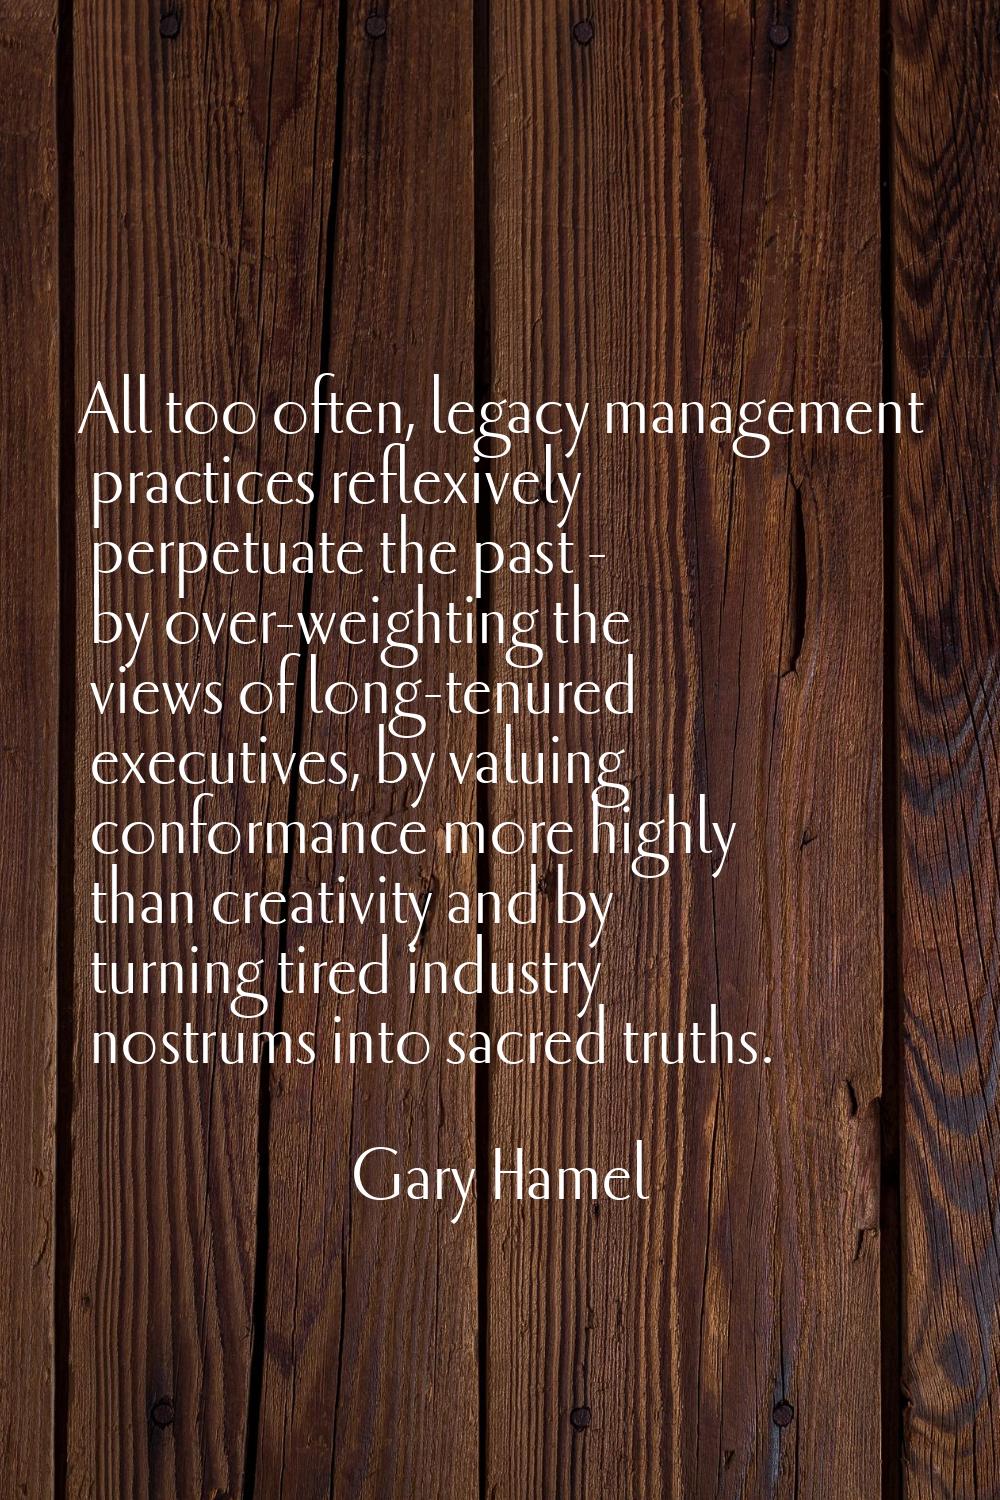 All too often, legacy management practices reflexively perpetuate the past - by over-weighting the 